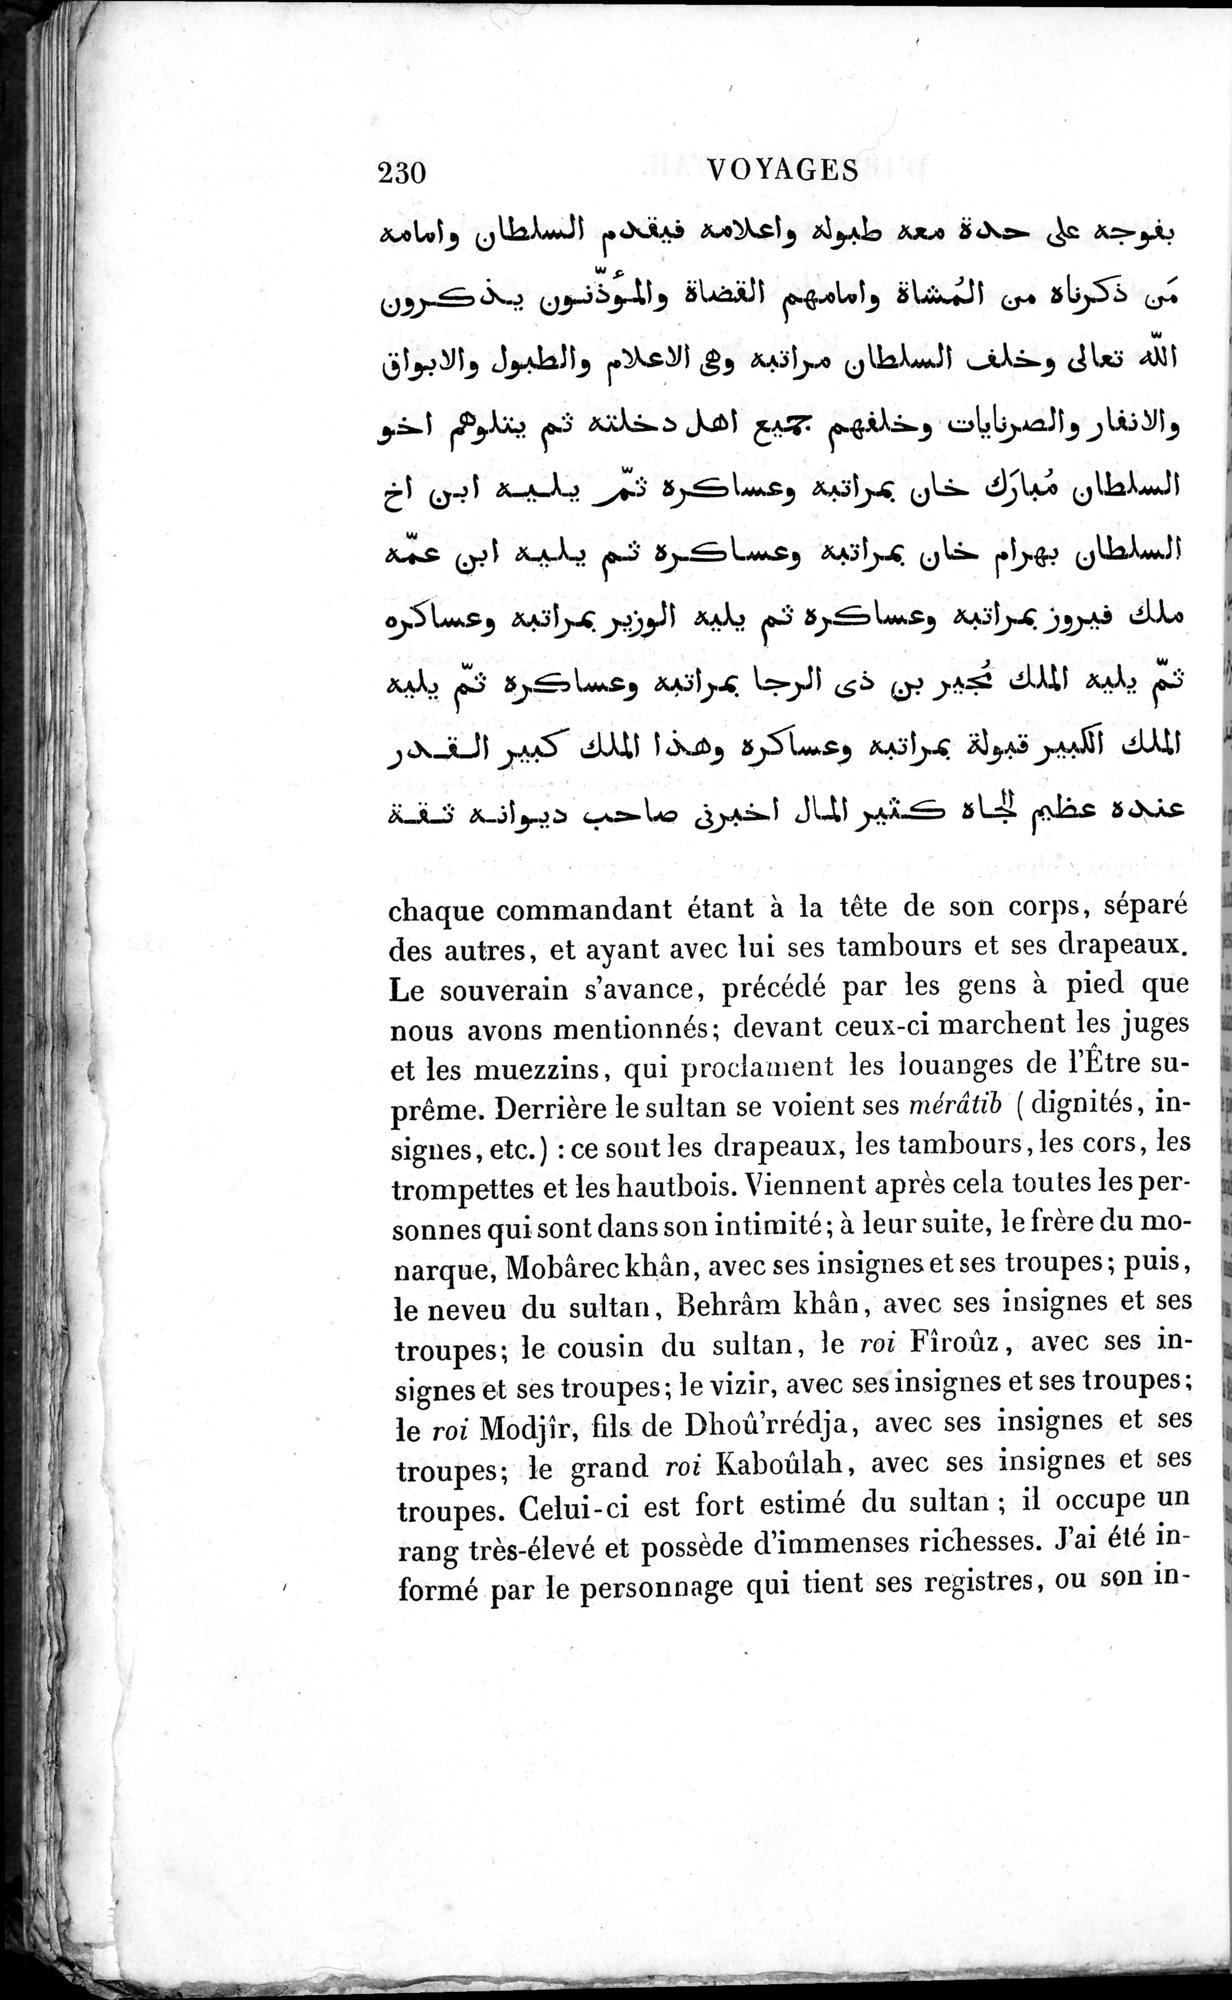 Voyages d'Ibn Batoutah : vol.3 / Page 270 (Grayscale High Resolution Image)